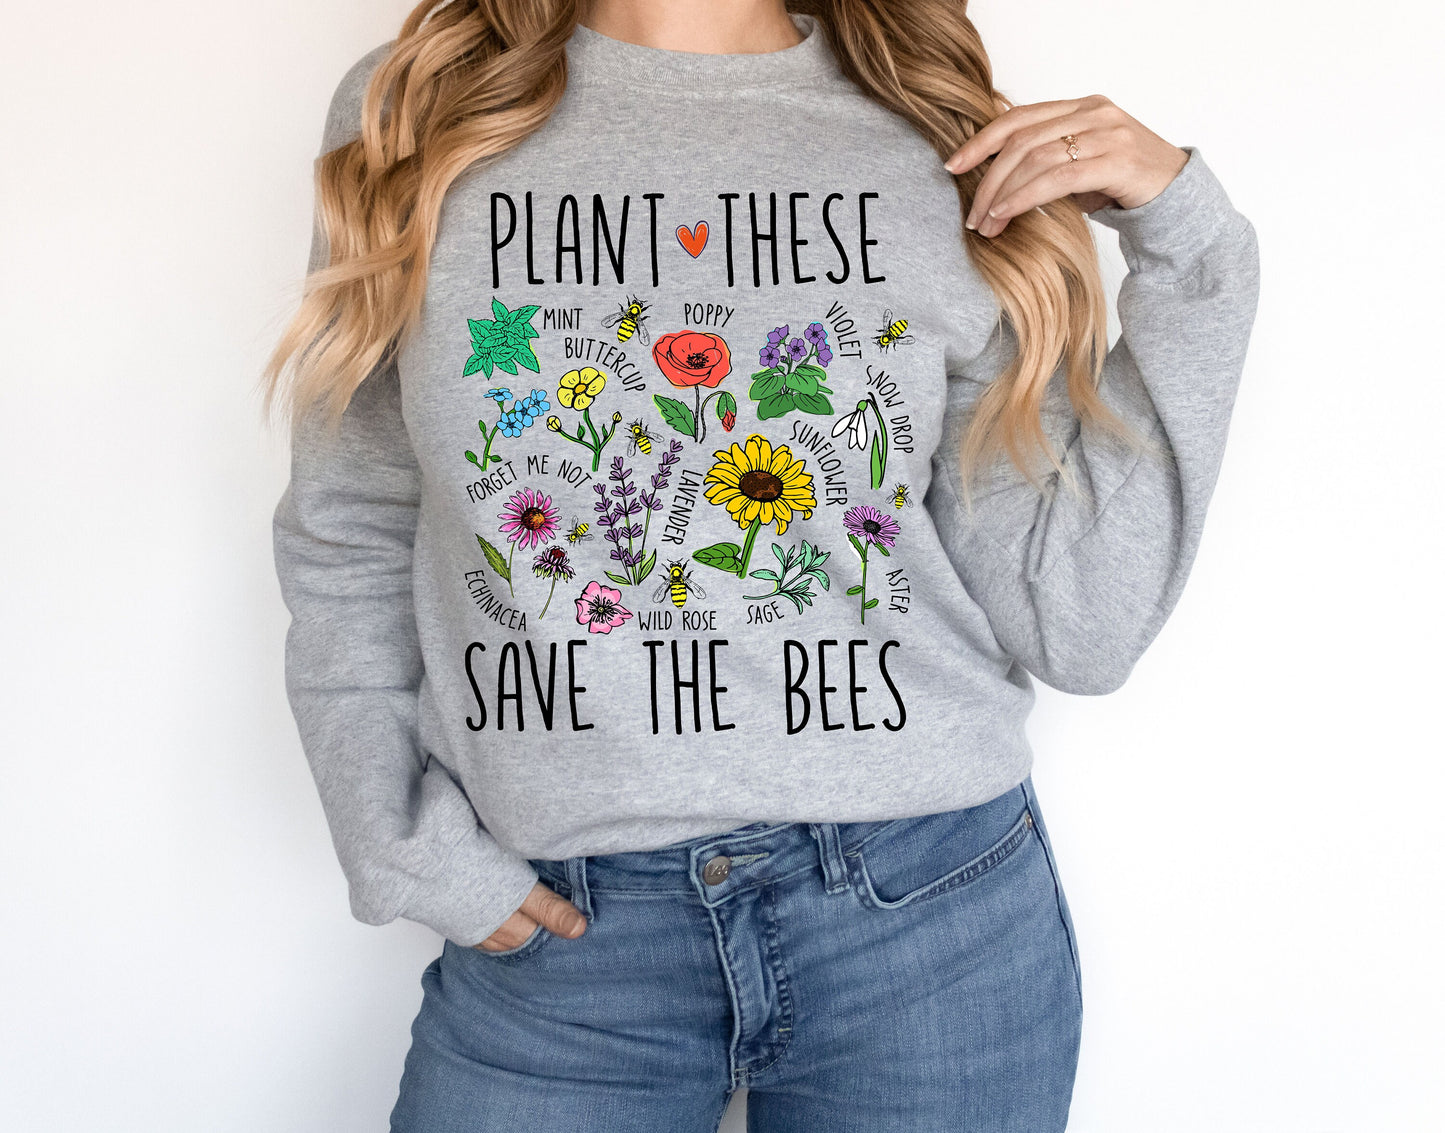 Plant These Save Bees Wild Flower Gardener's Save the Bees Ultra Cozy Retro Drop Shoulder Graphic Book Club Sweatshirt for Women or Men